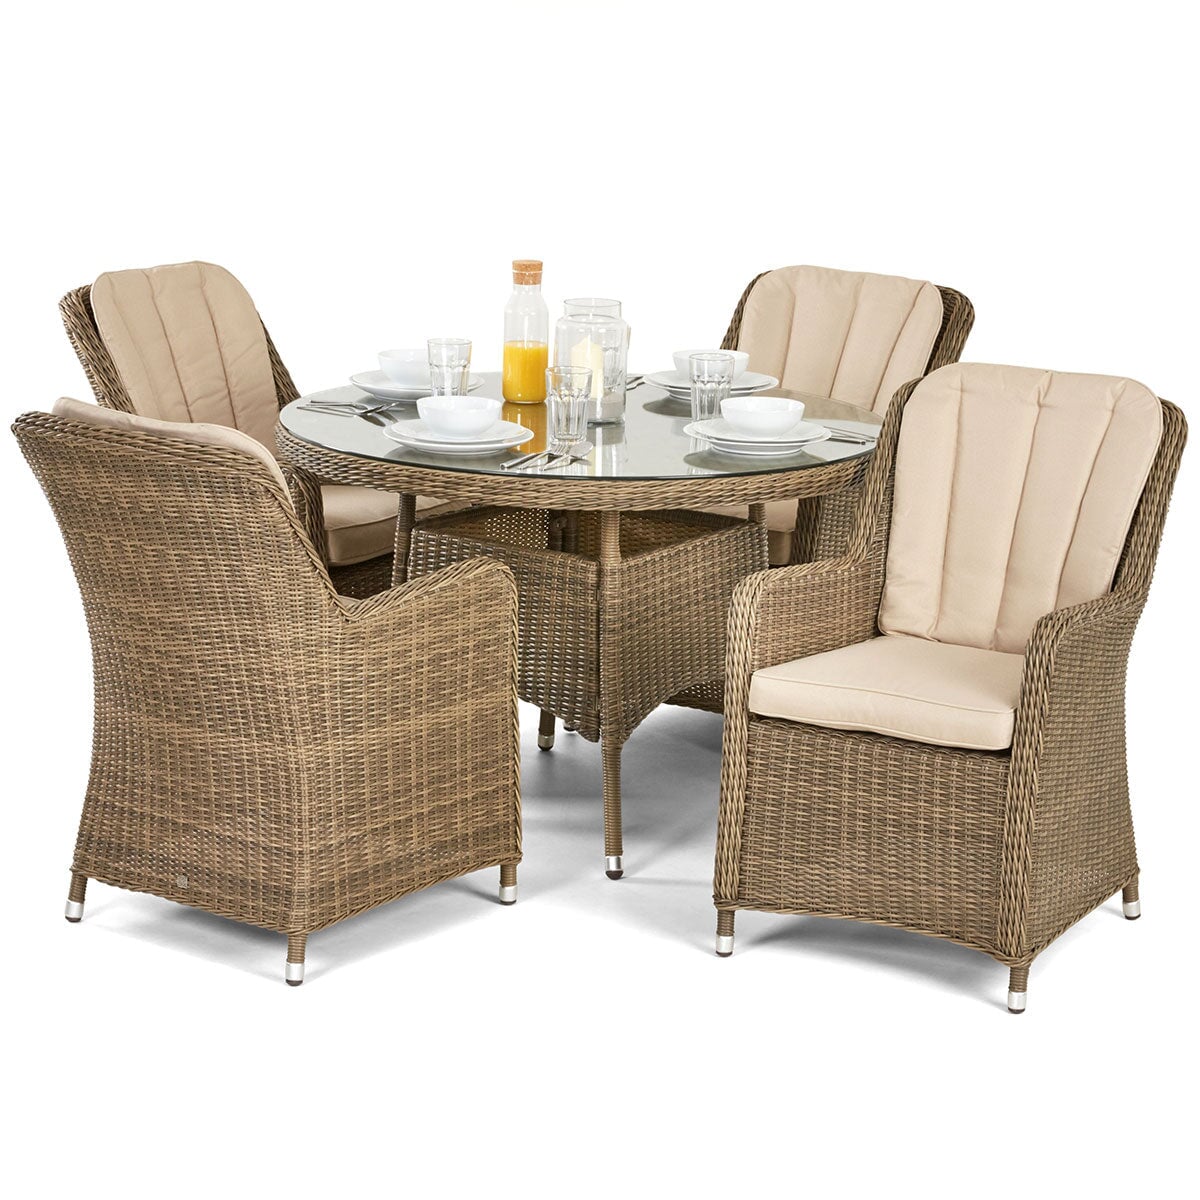 Winchester 4 Seat Round Dining Set with Venice Chairs | Natural